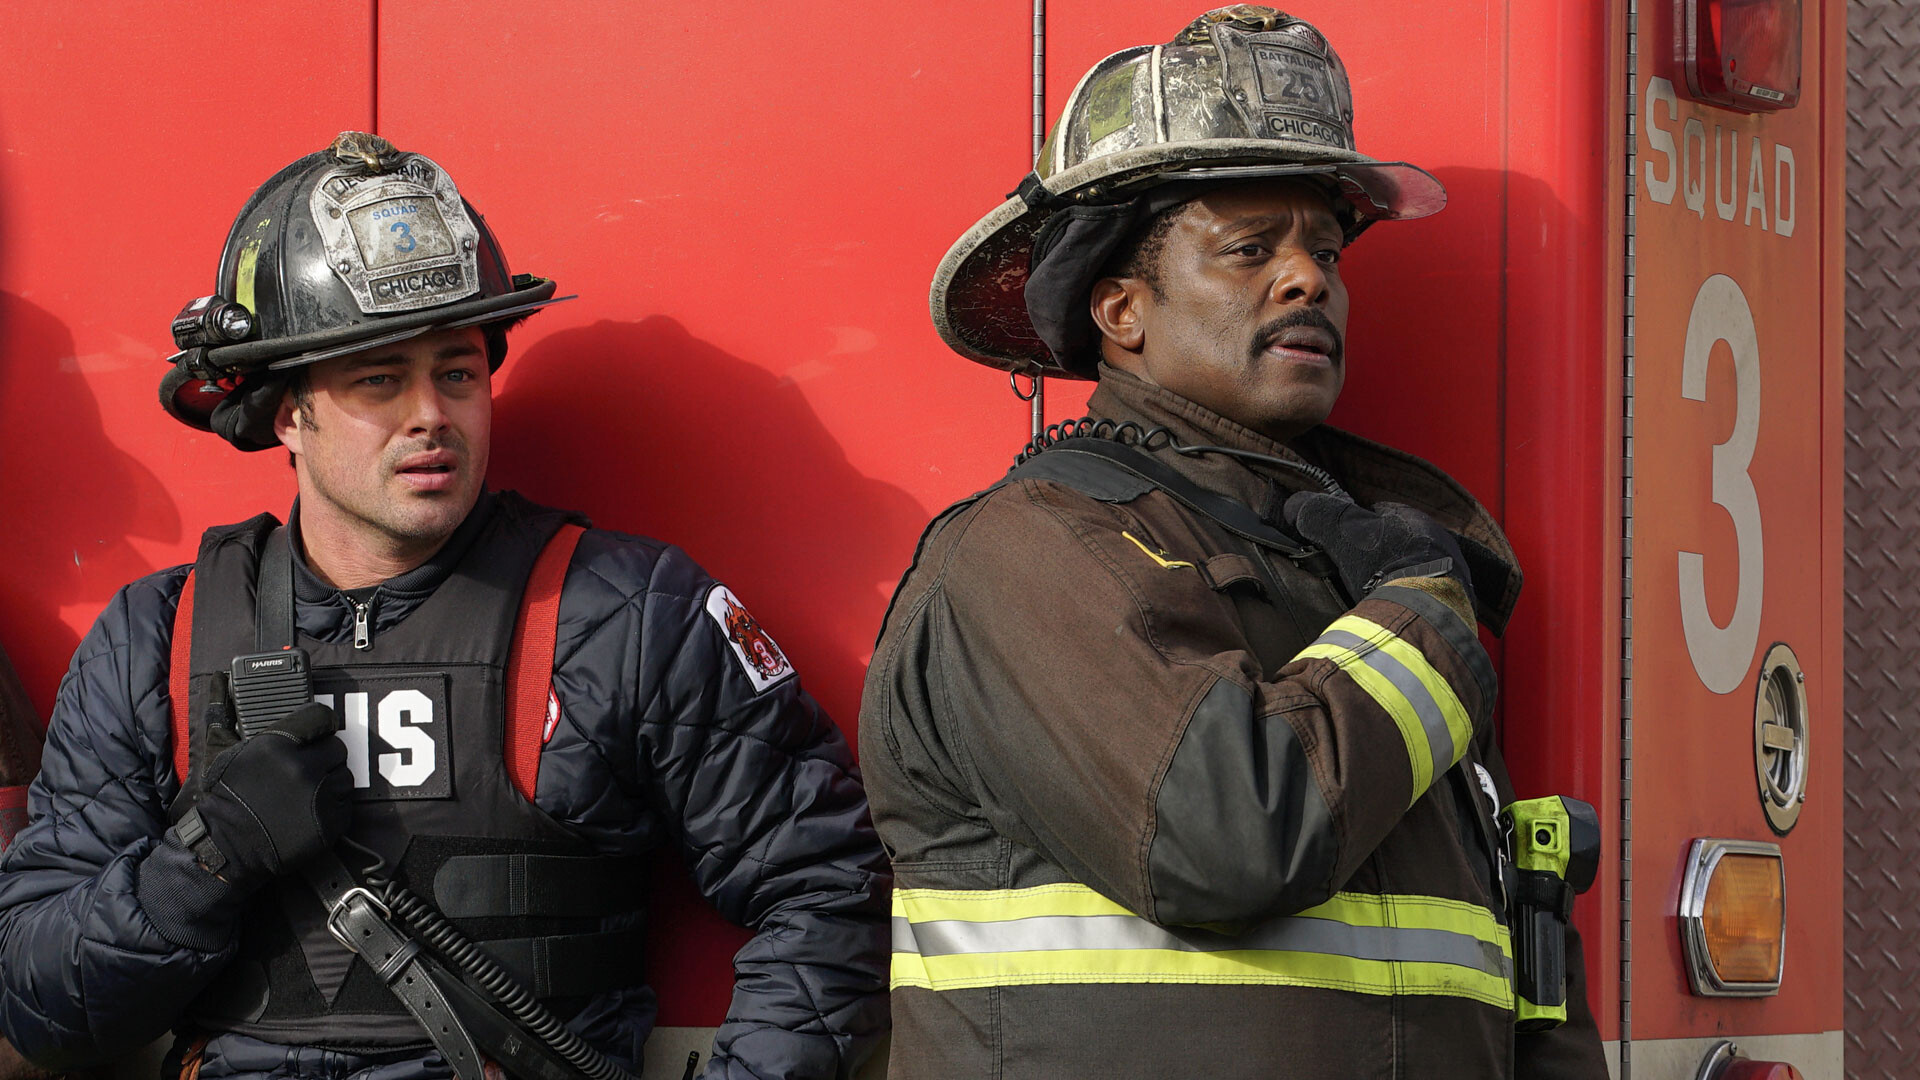 Chicago Fire (TV Series): Chief Boden, The head of Firehouse 51, Three decades in the department, A father figure to Severide and Casey. 1920x1080 Full HD Background.